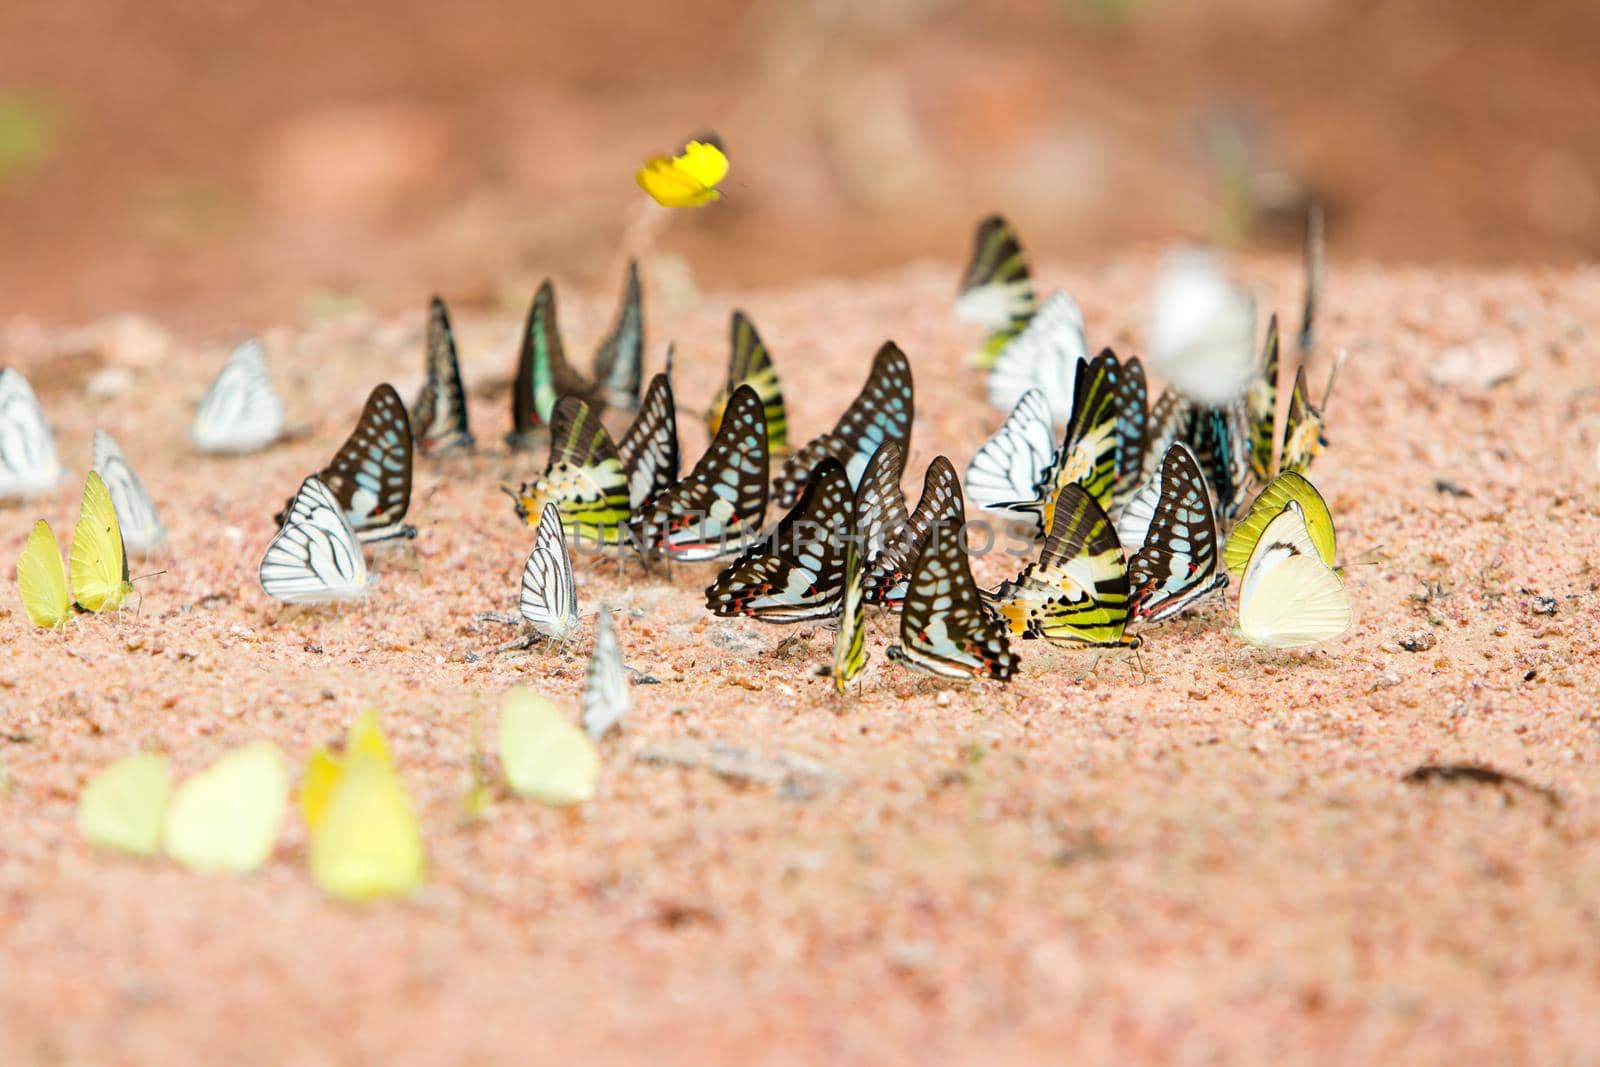 Group of butterflies common jay eaten mineral on sand. by jayzynism